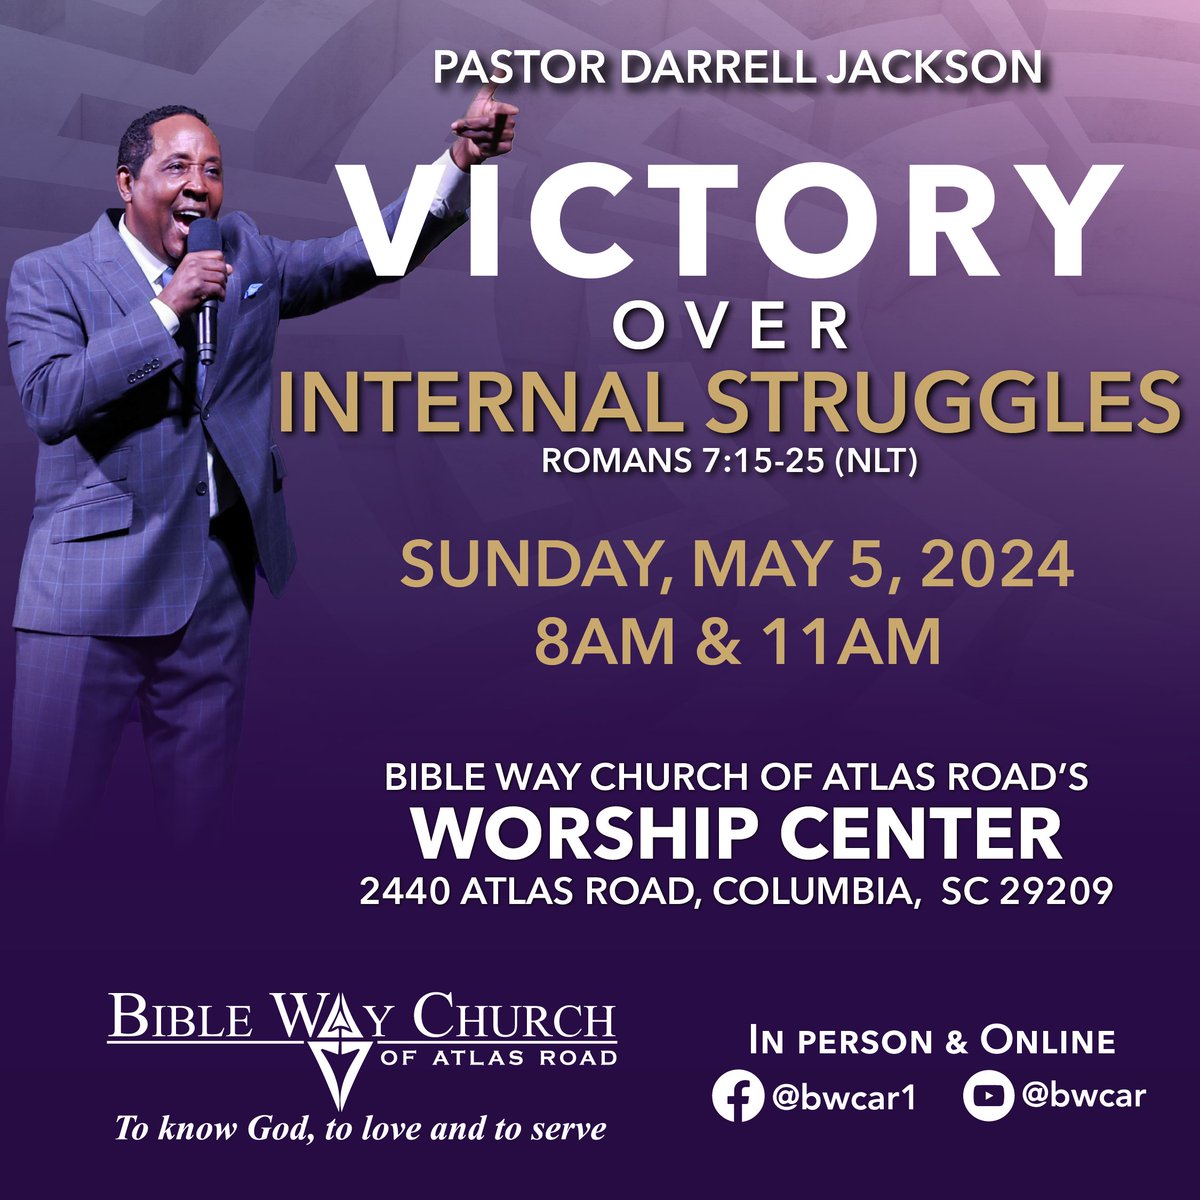 Join us live on YouTube tomorrow at 8 am and 11 am, as Pastor Jackson shares a special message, “Victory Over Internal Struggles.”